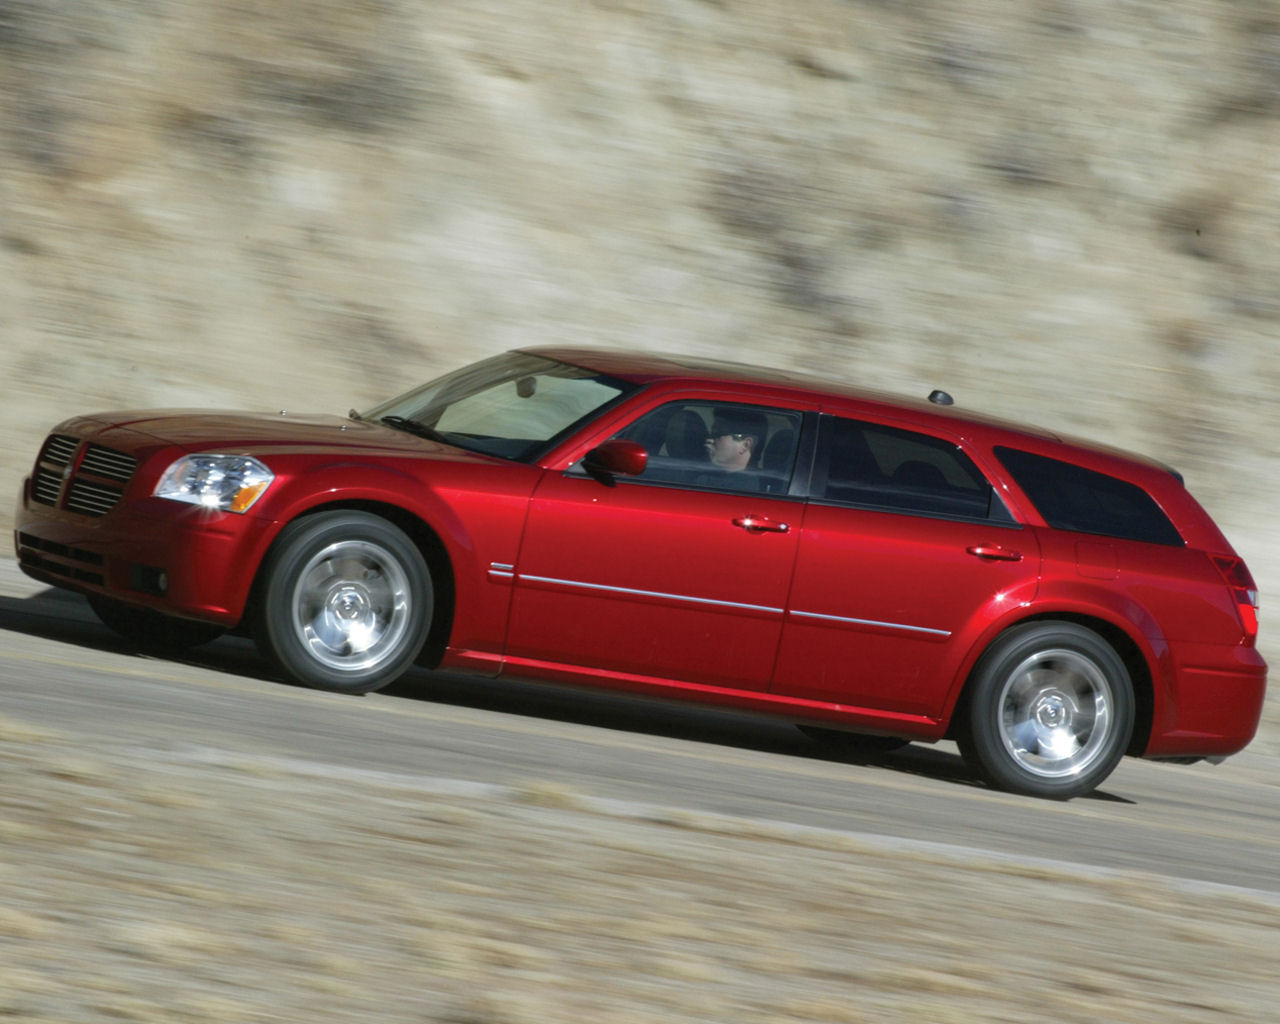 On The Dodge Magnum Wallpaper Below And Choose Set As Background